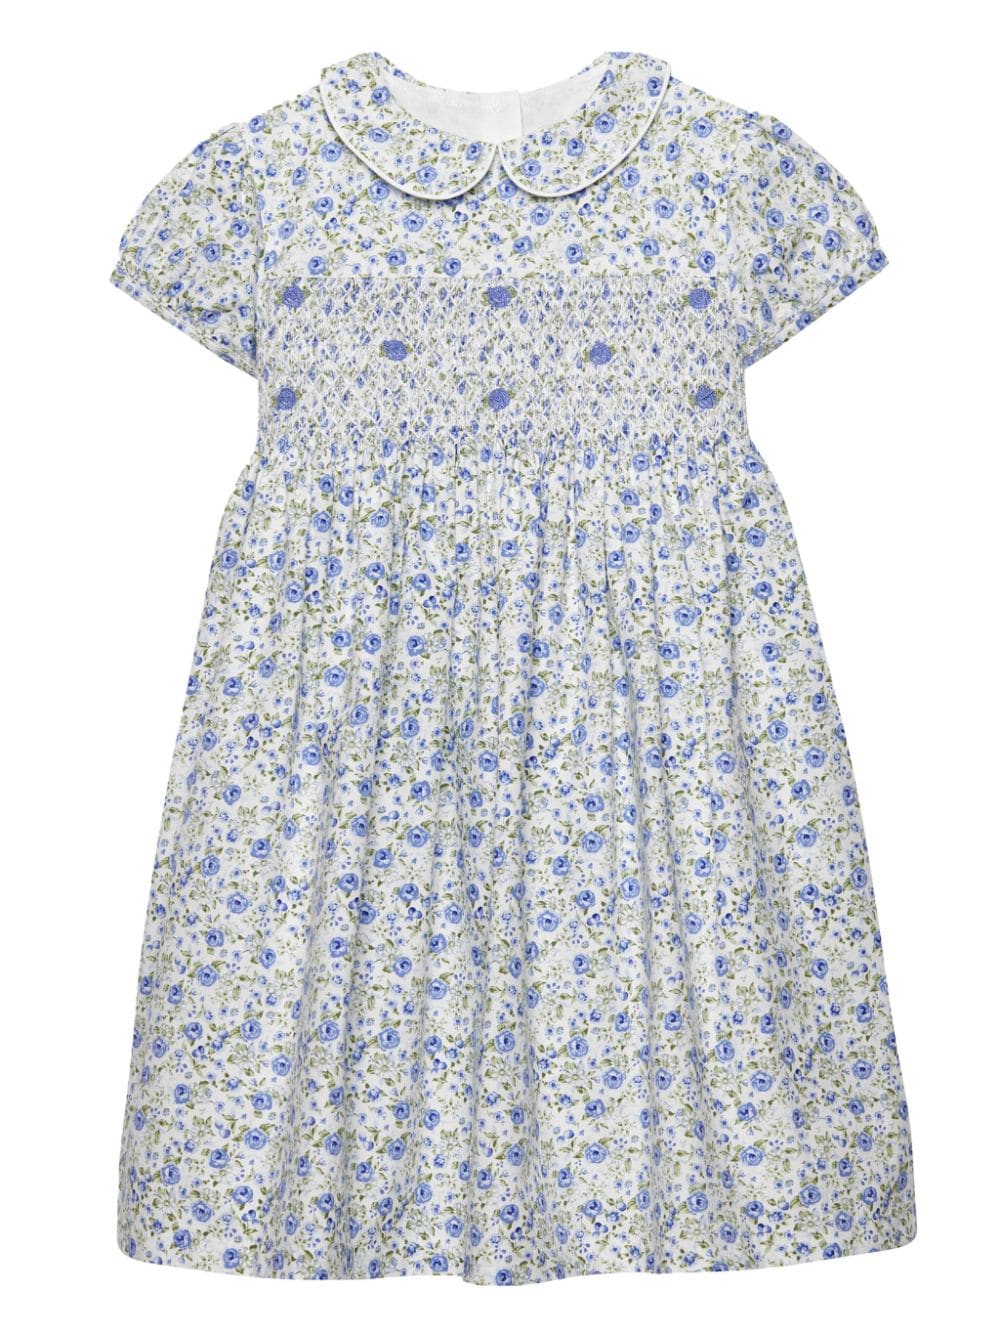 Trotters Catherine Rose smocked cotton dress - White von Trotters